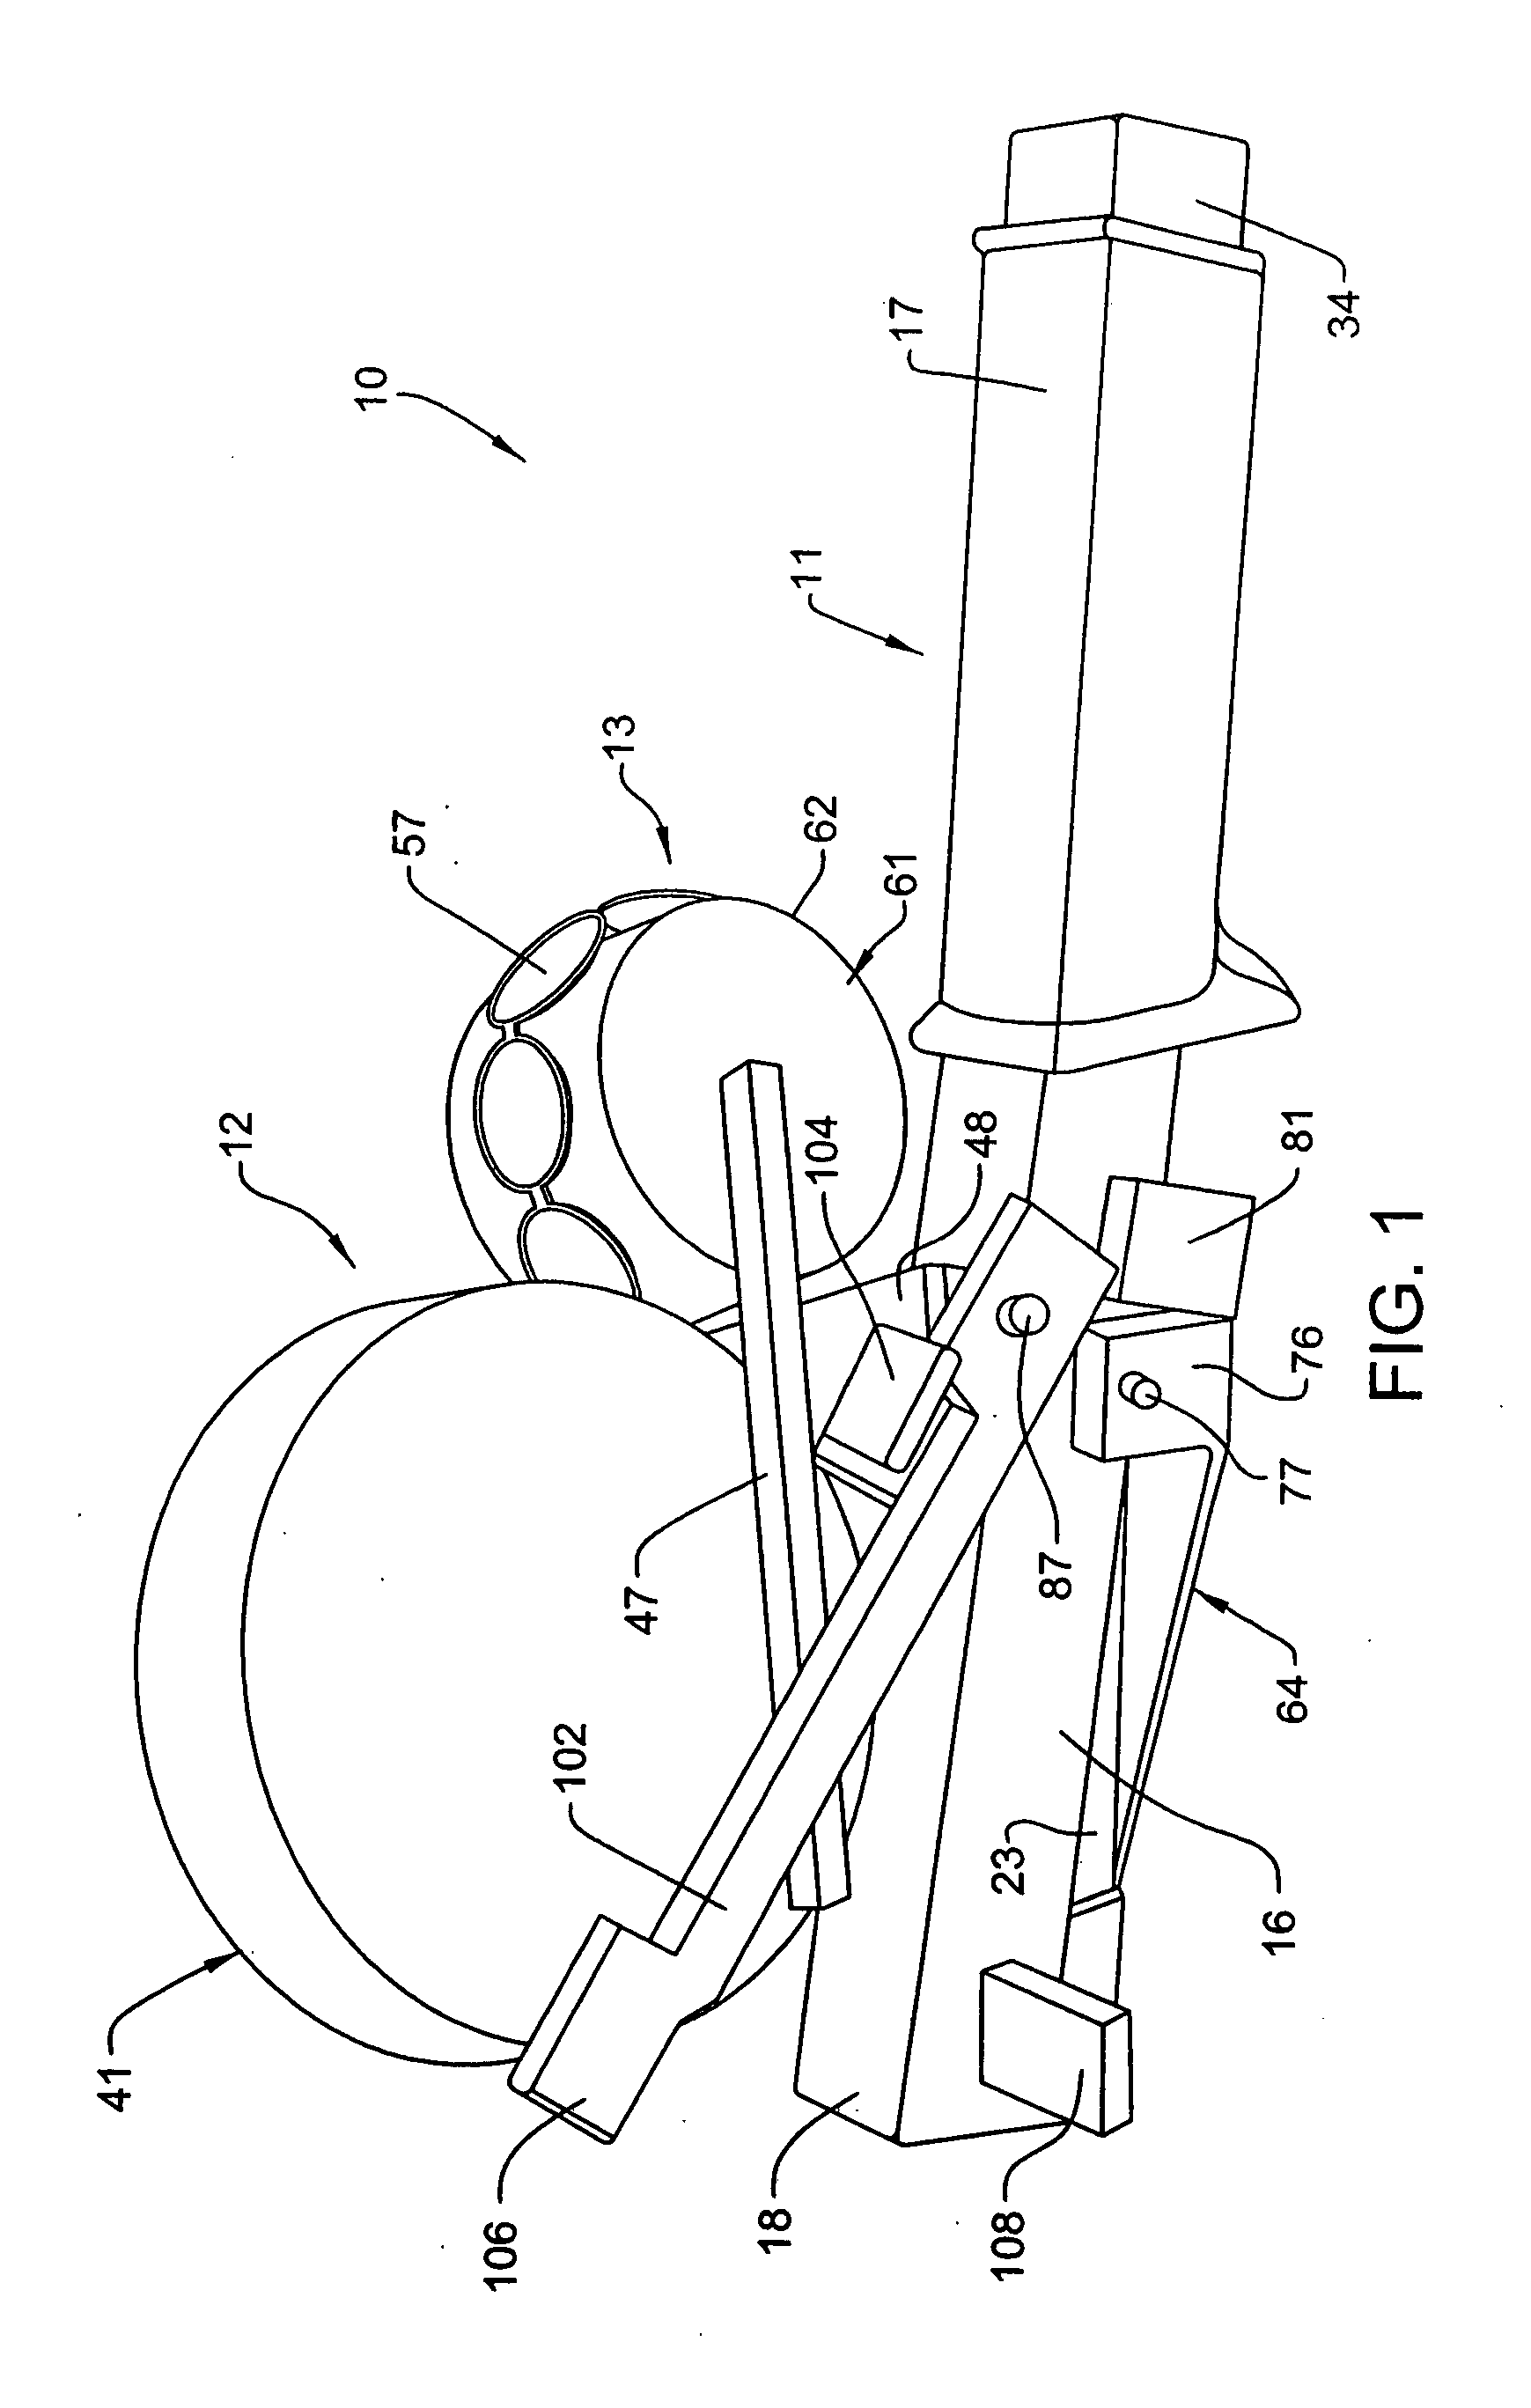 Impact fastener tool with cap feed